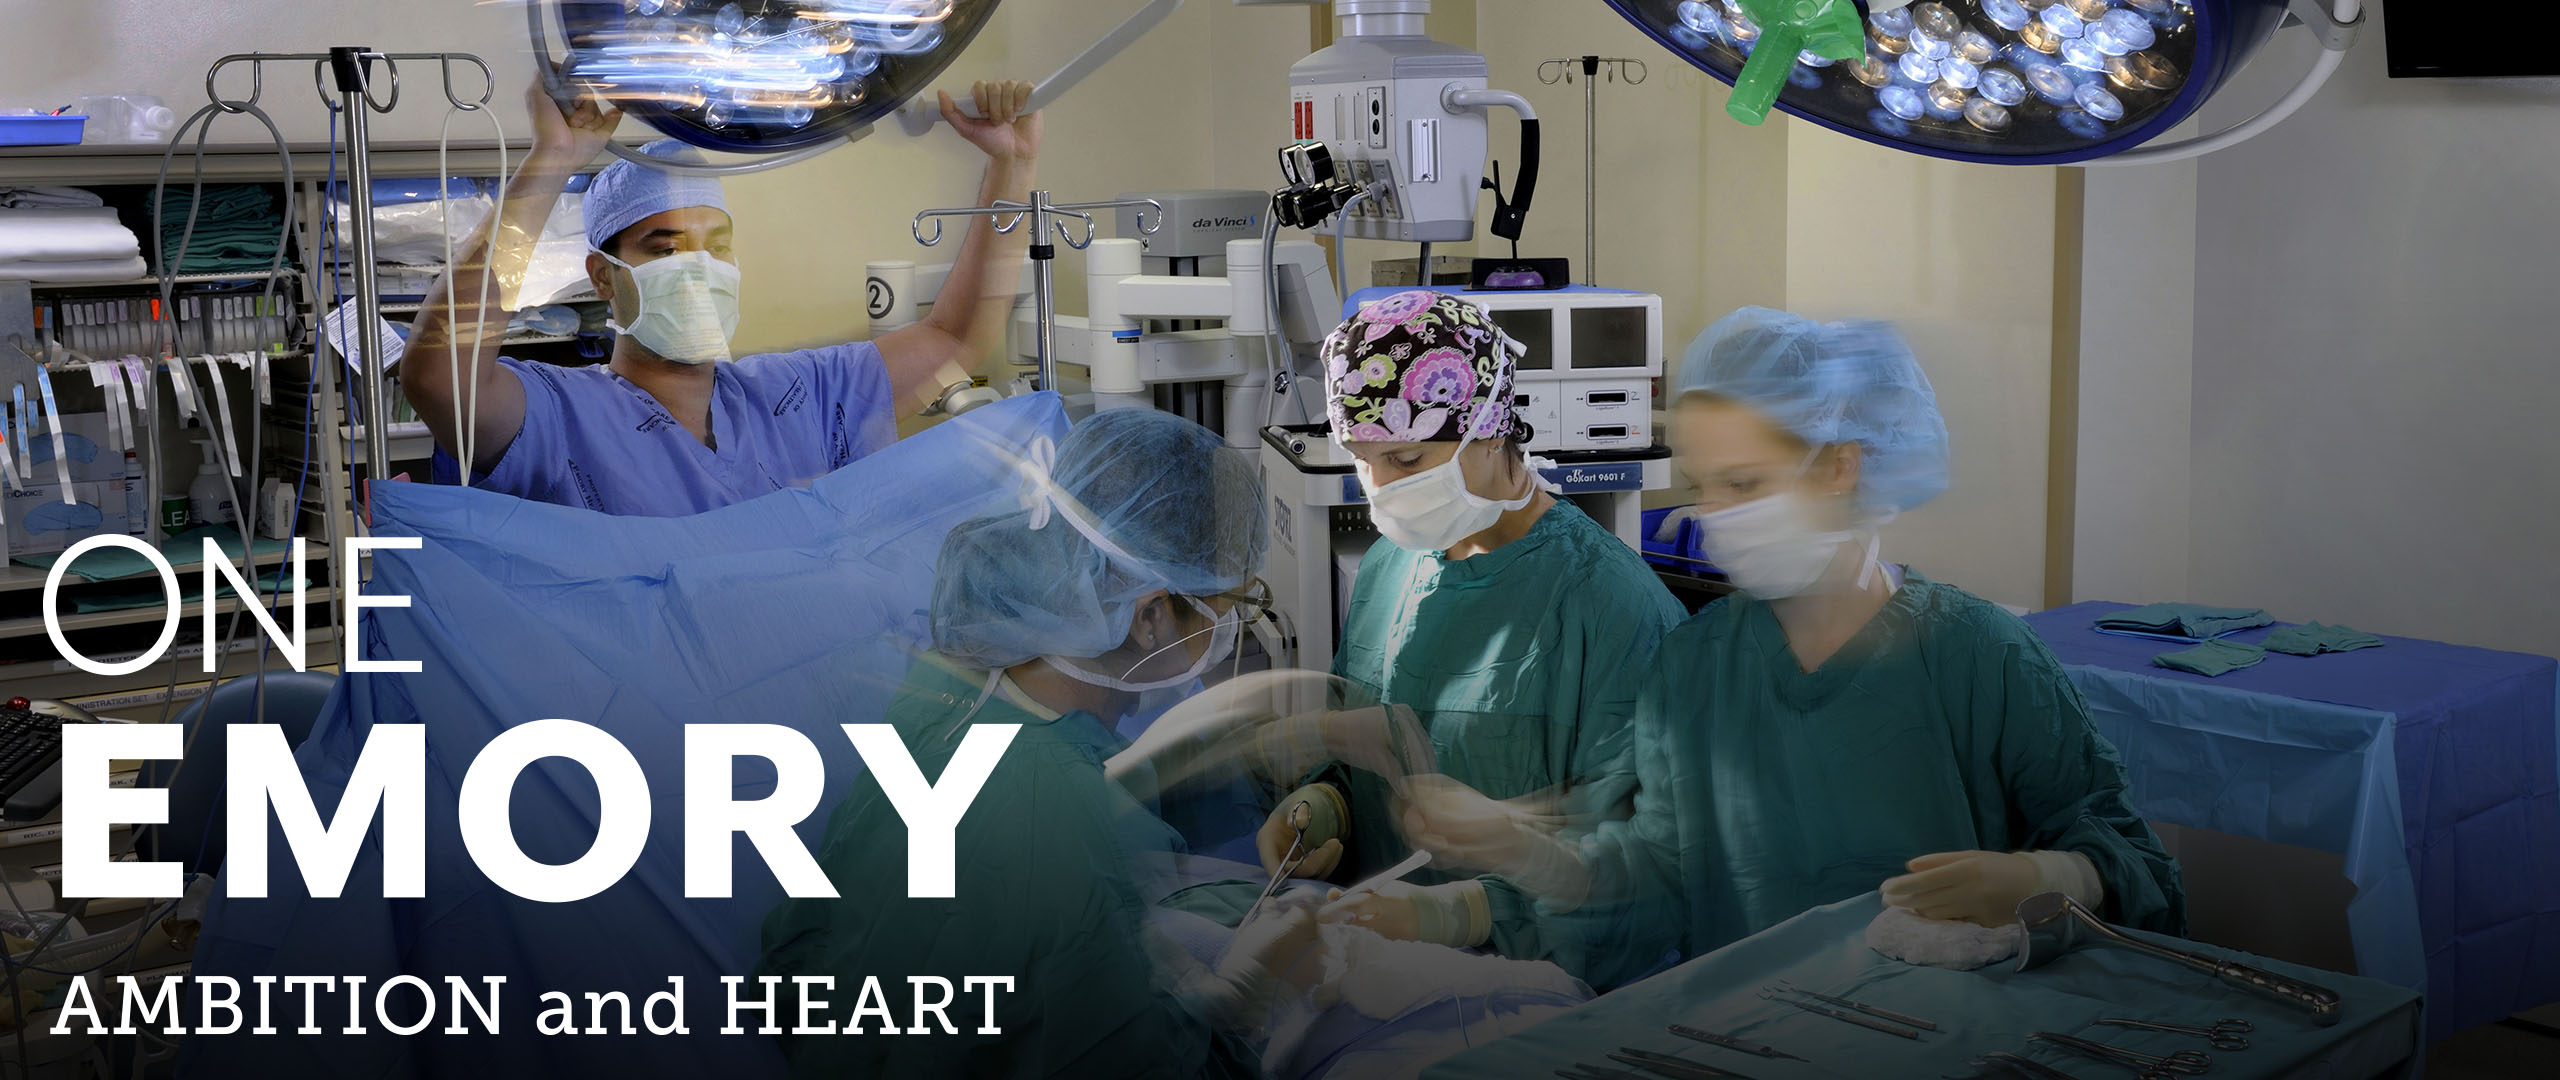 Photo: Surgical team conducting surgery in operating room. 